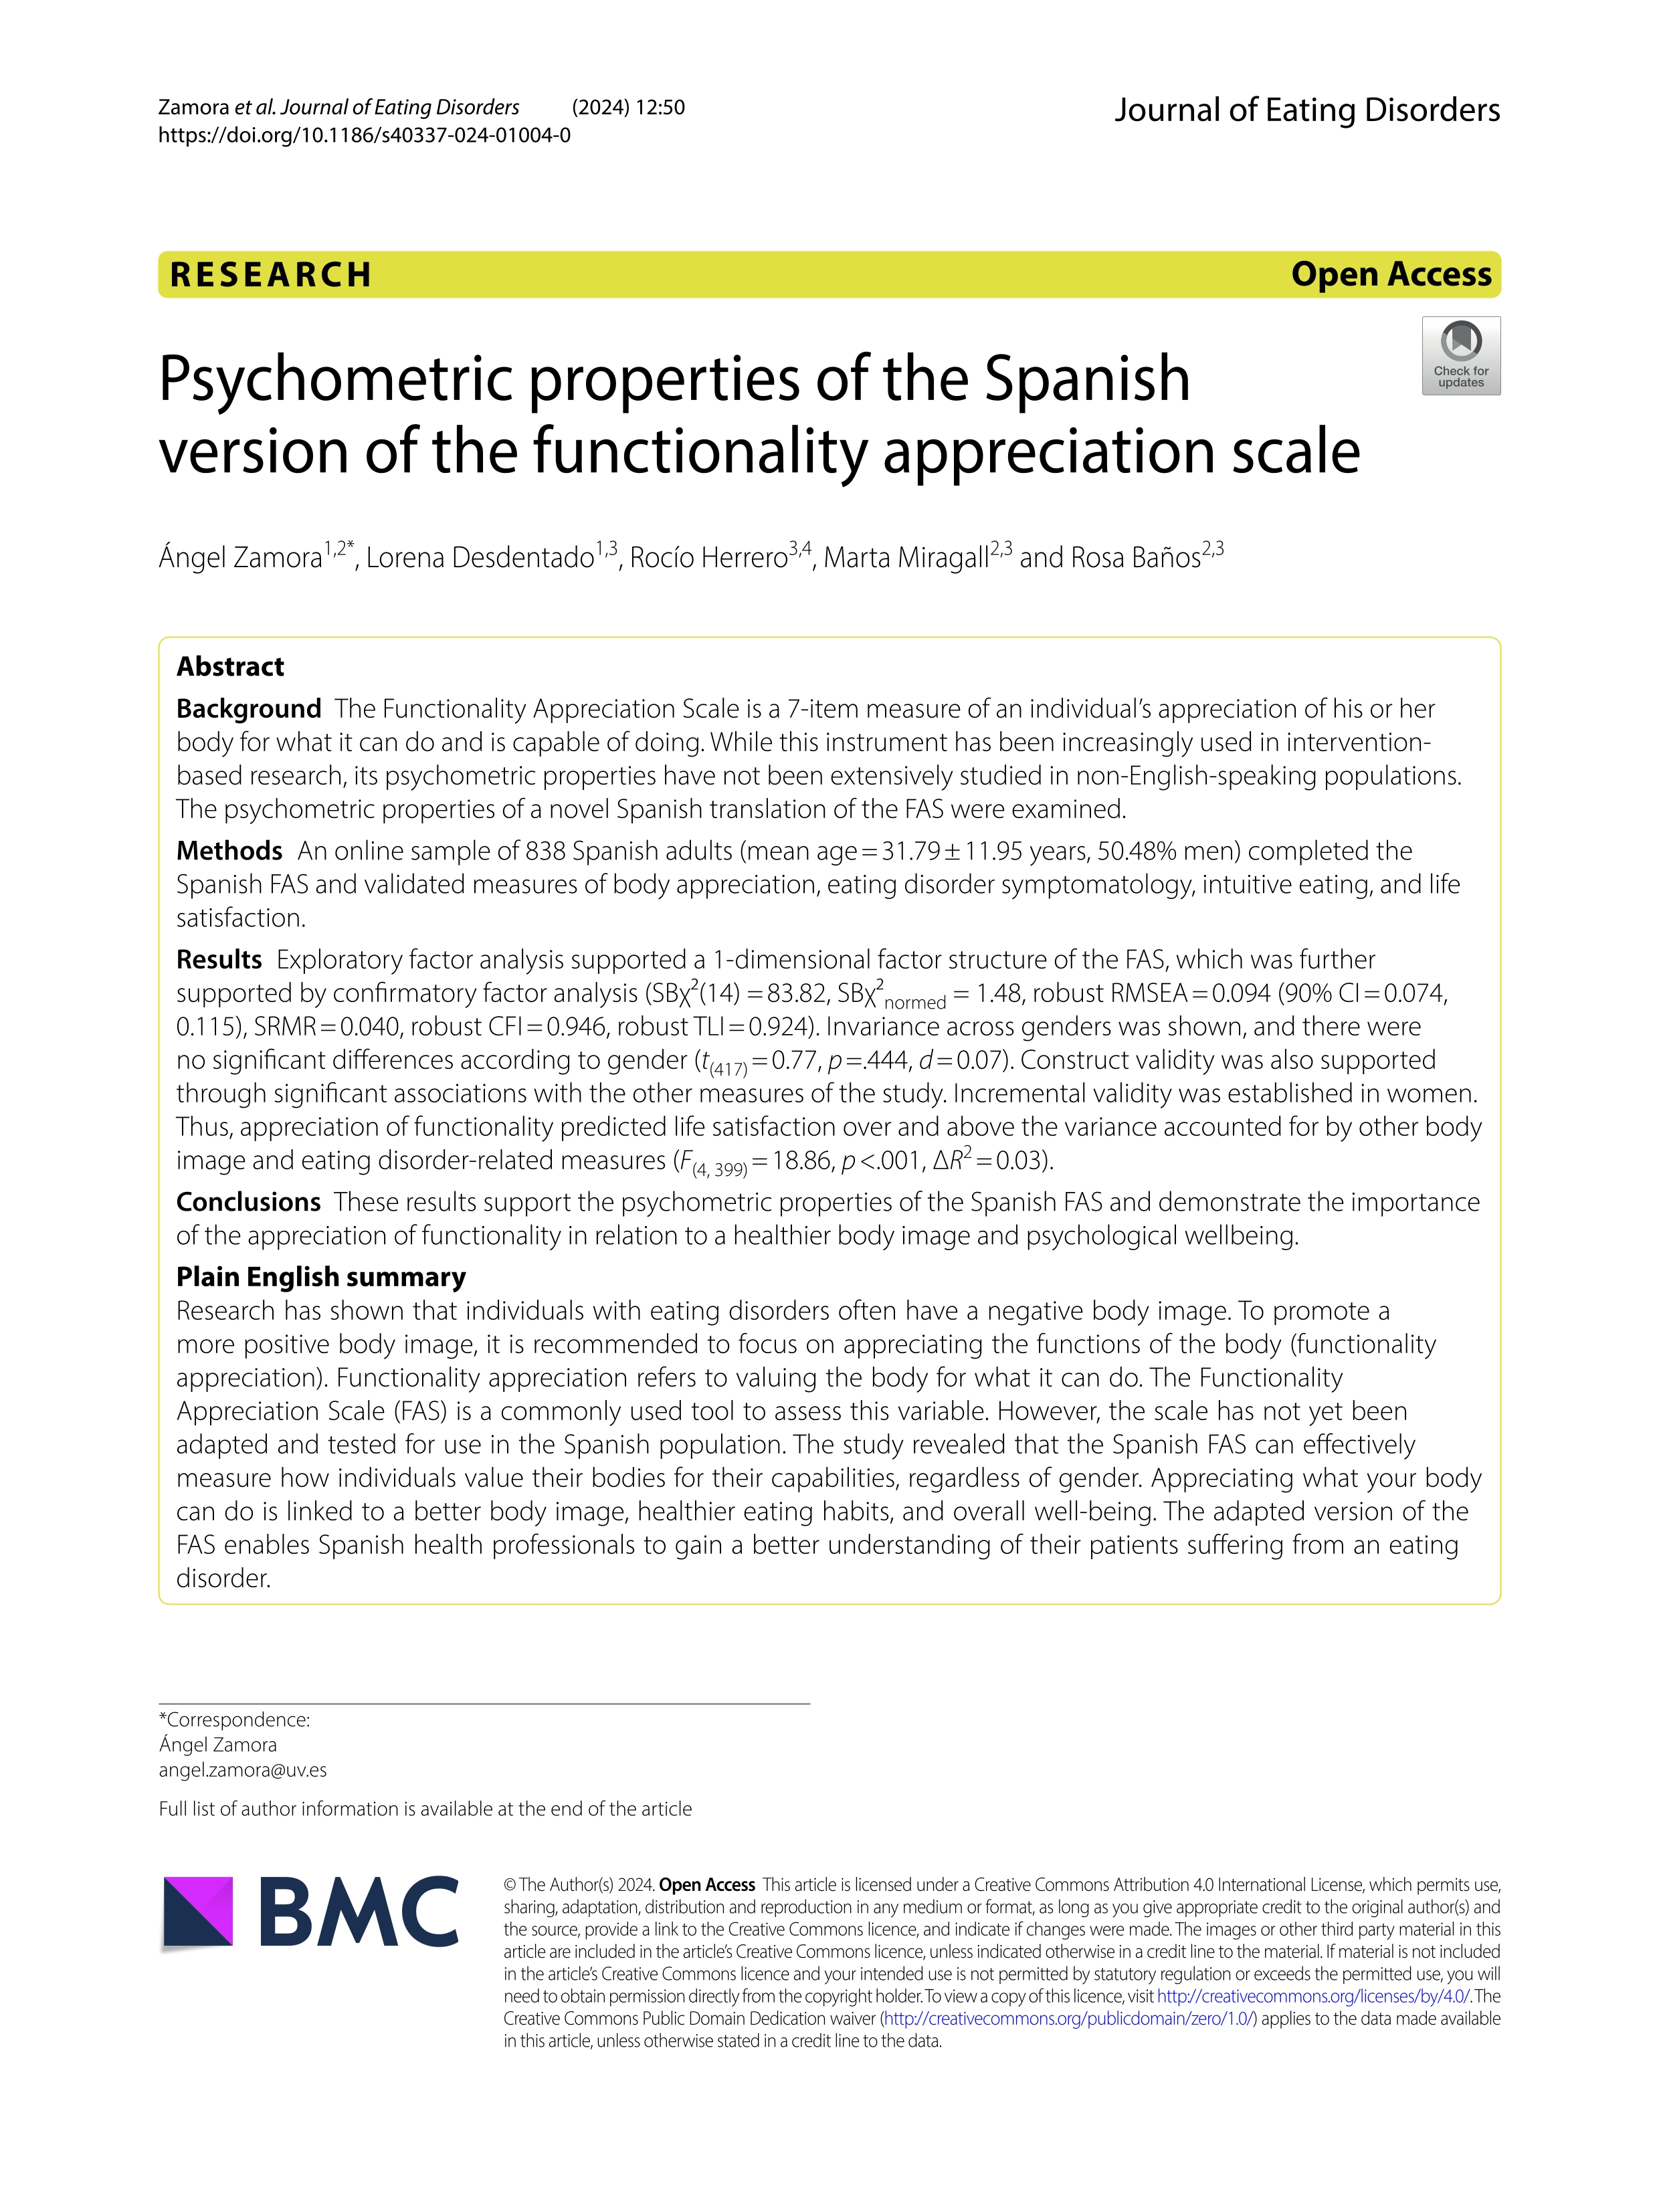 Psychometric properties of the Spanish version of the functionality appreciation scale